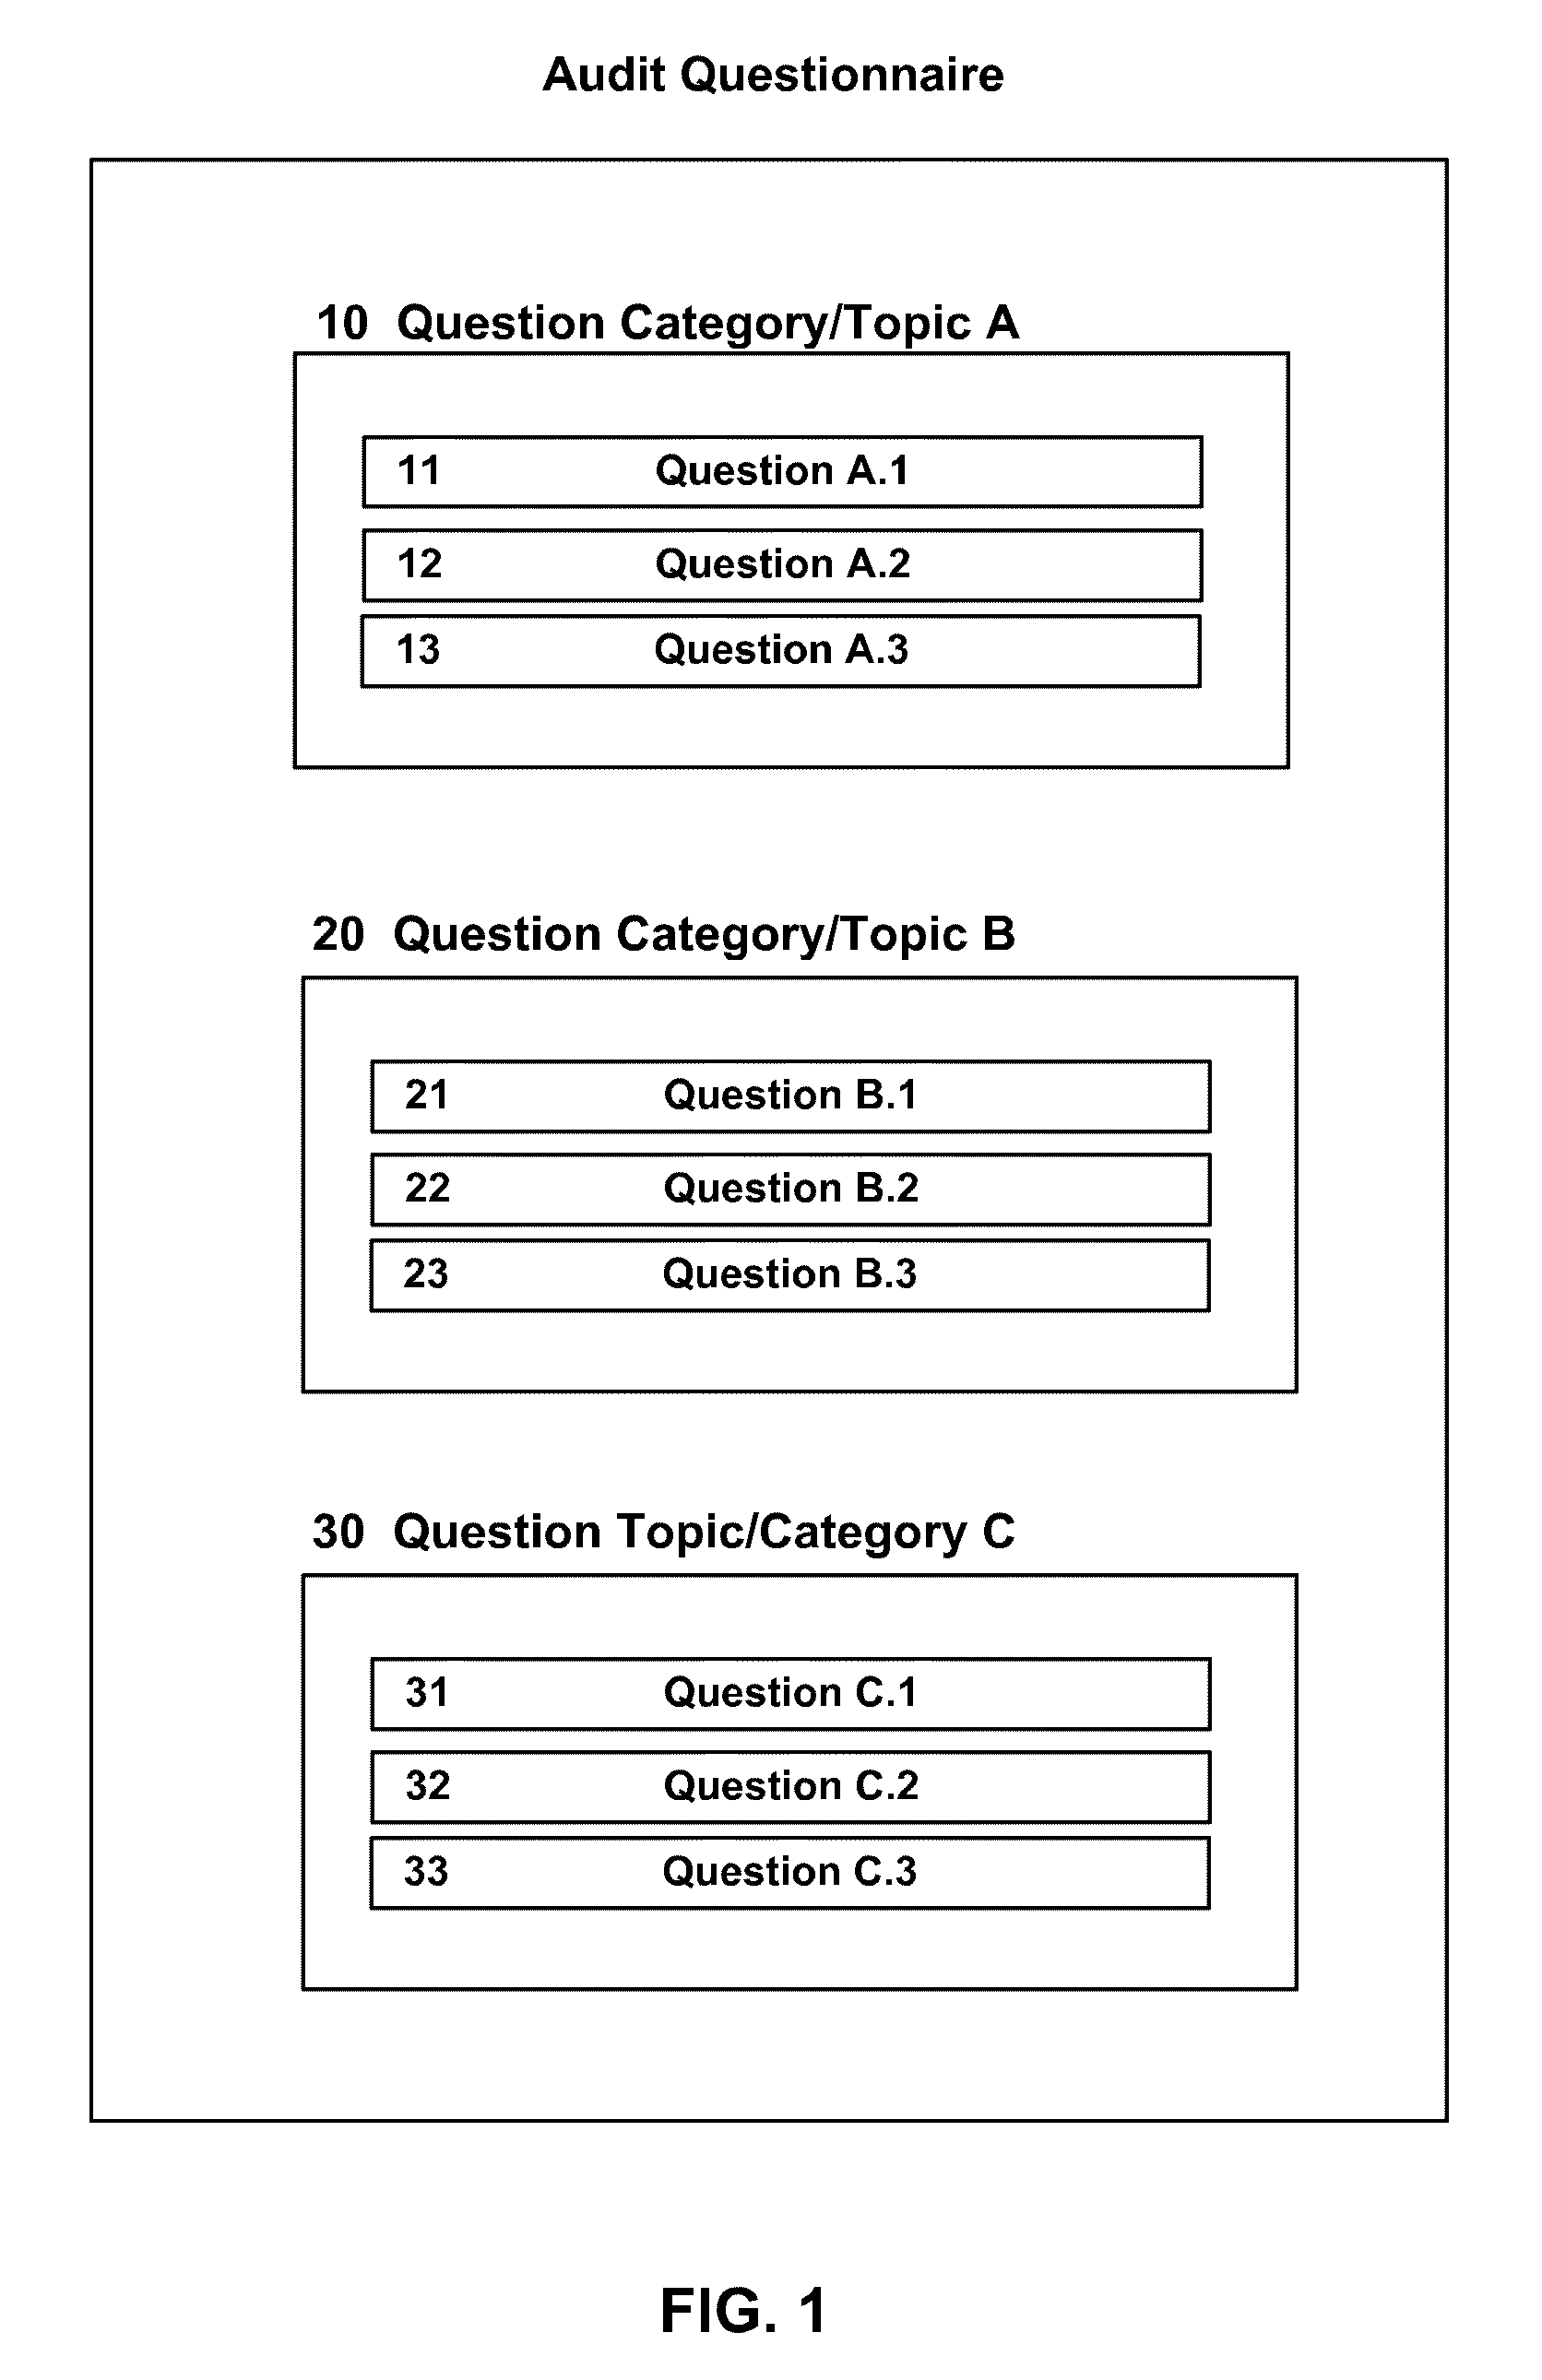 System and method for monitoring fiduciary compliance with employee retirement plan governance requirements